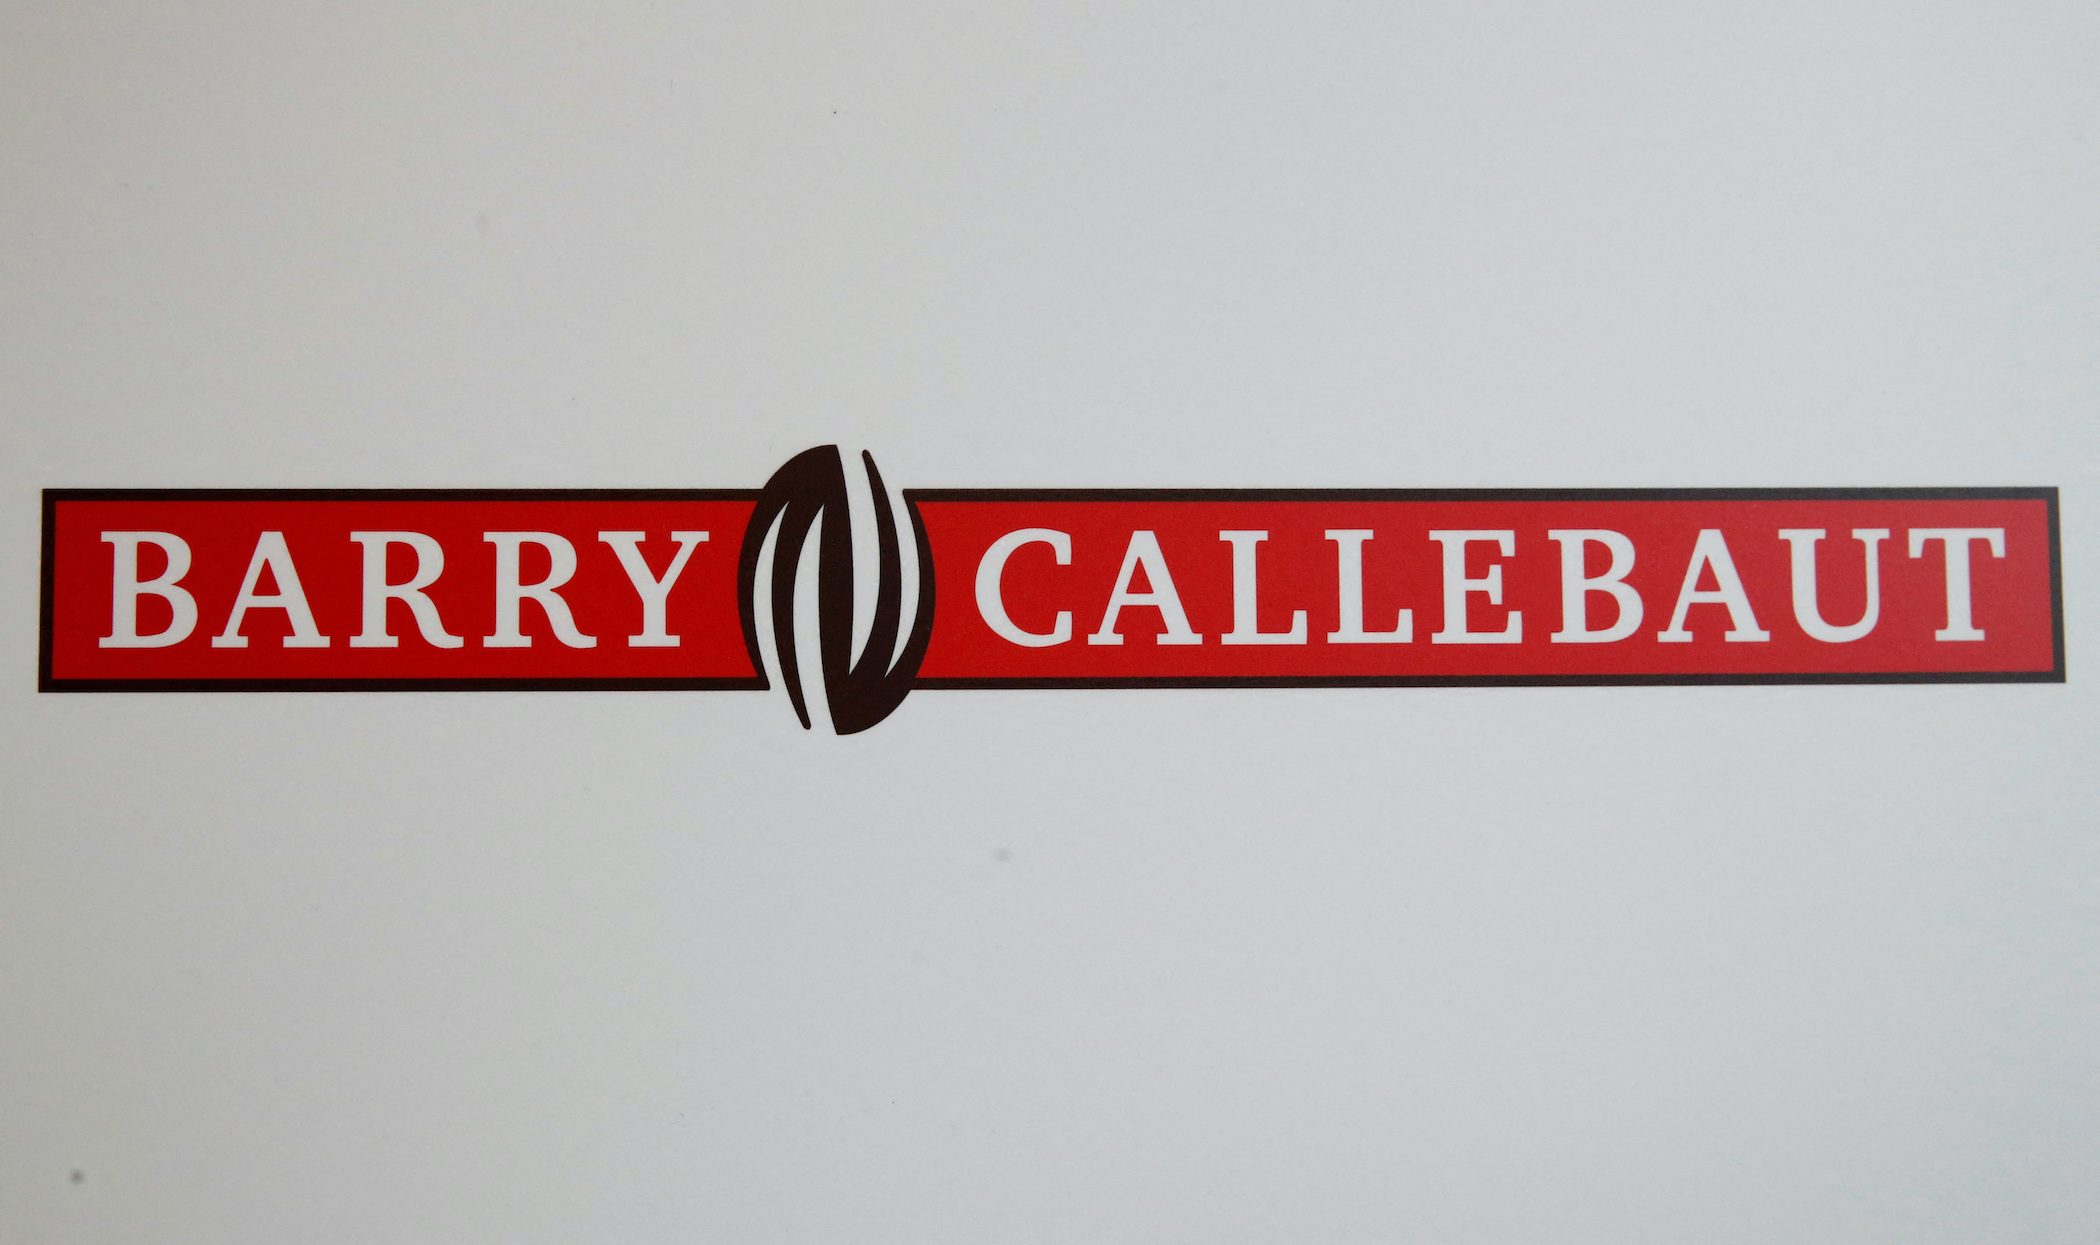 Barry Callebaut expects to hit sustainable cocoa target by 2025